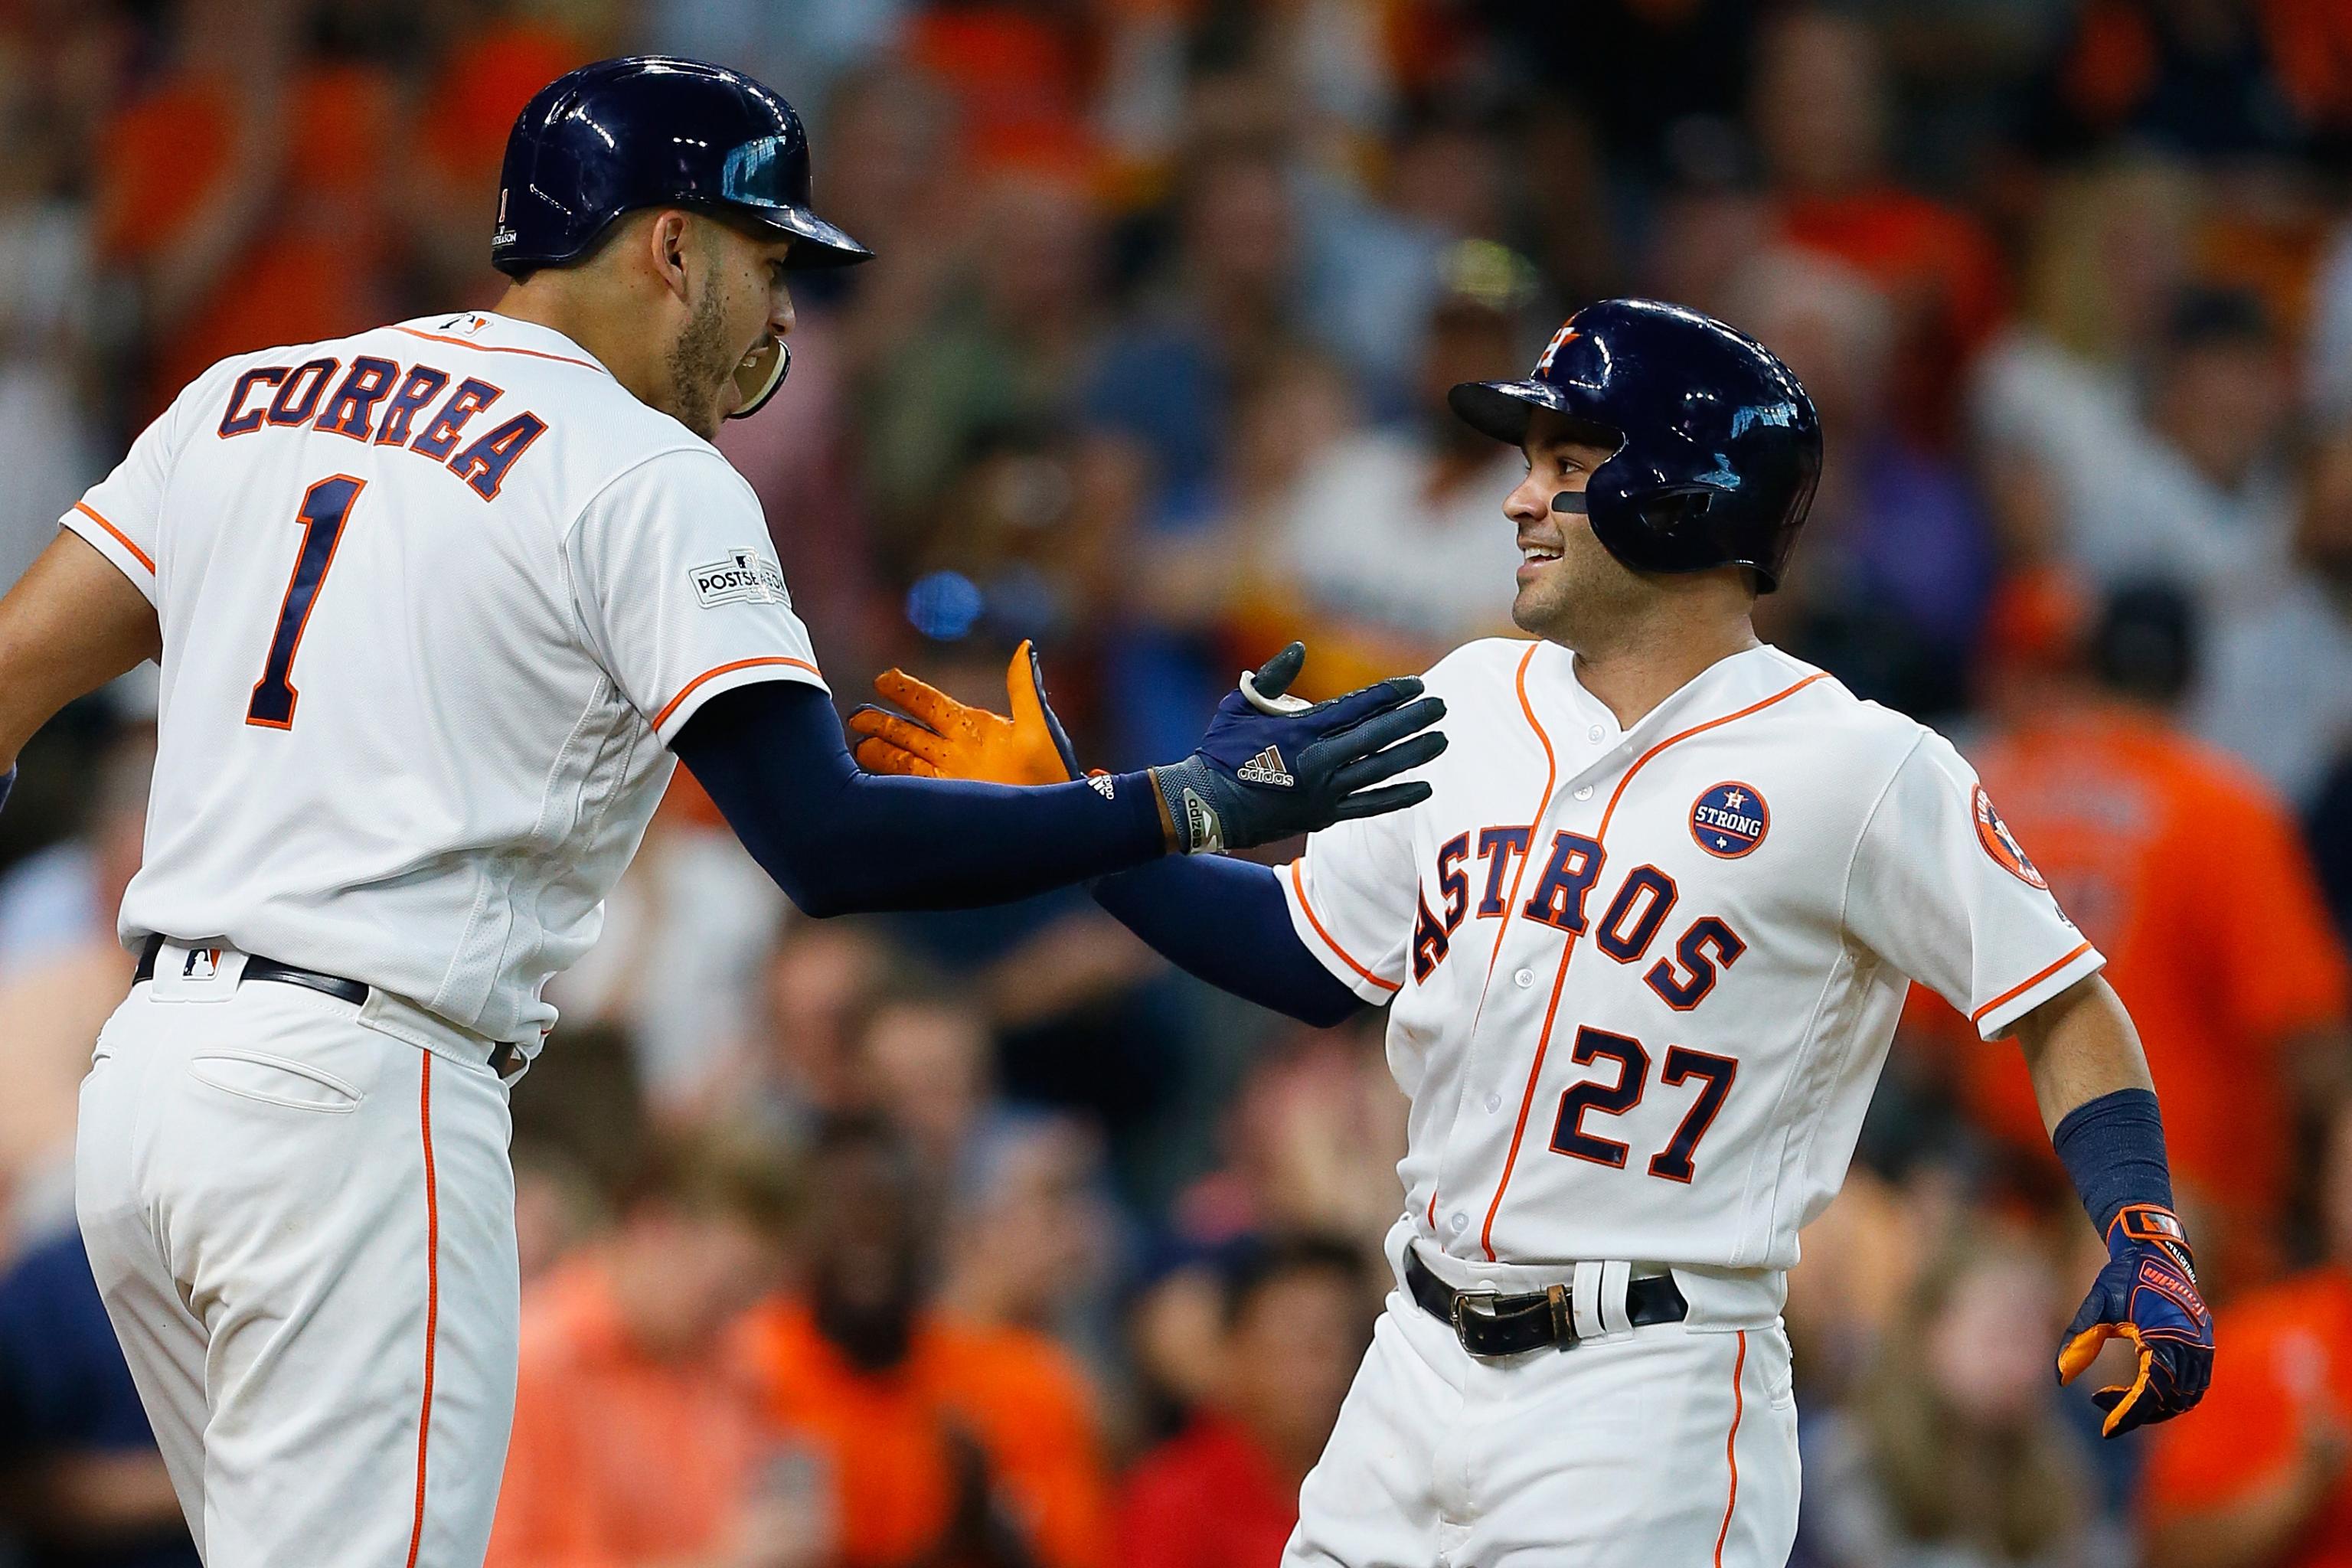 ALDS results 2017: Astros beat Red Sox 8-2 in Game 2 